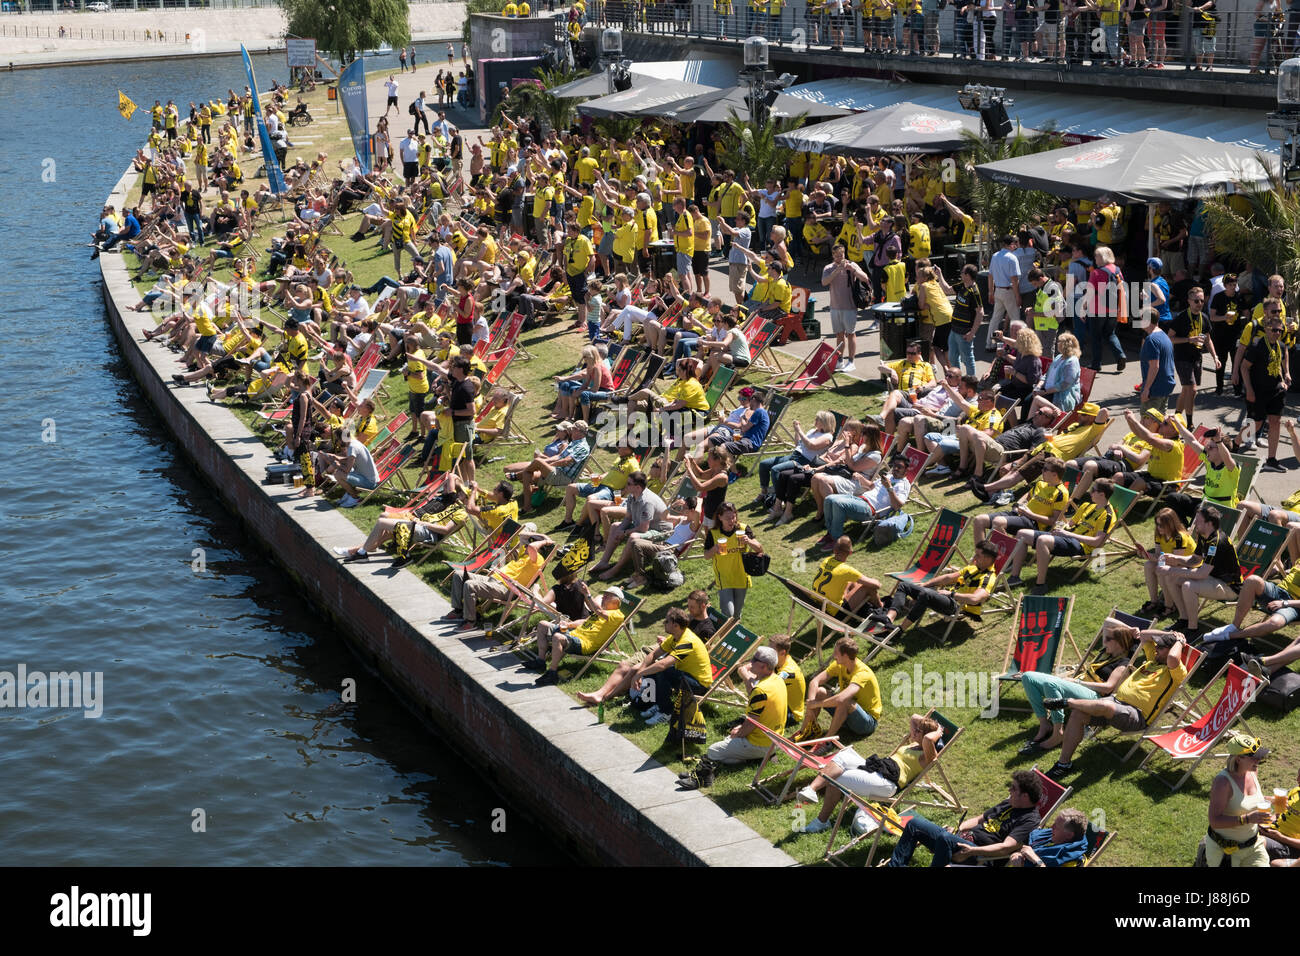 Berlin, Germany - may 27, 2017: BVB Fans / Borussia Dortmund Fans at riverside in Berlin on the day of the DFB-Pokal final. Stock Photo